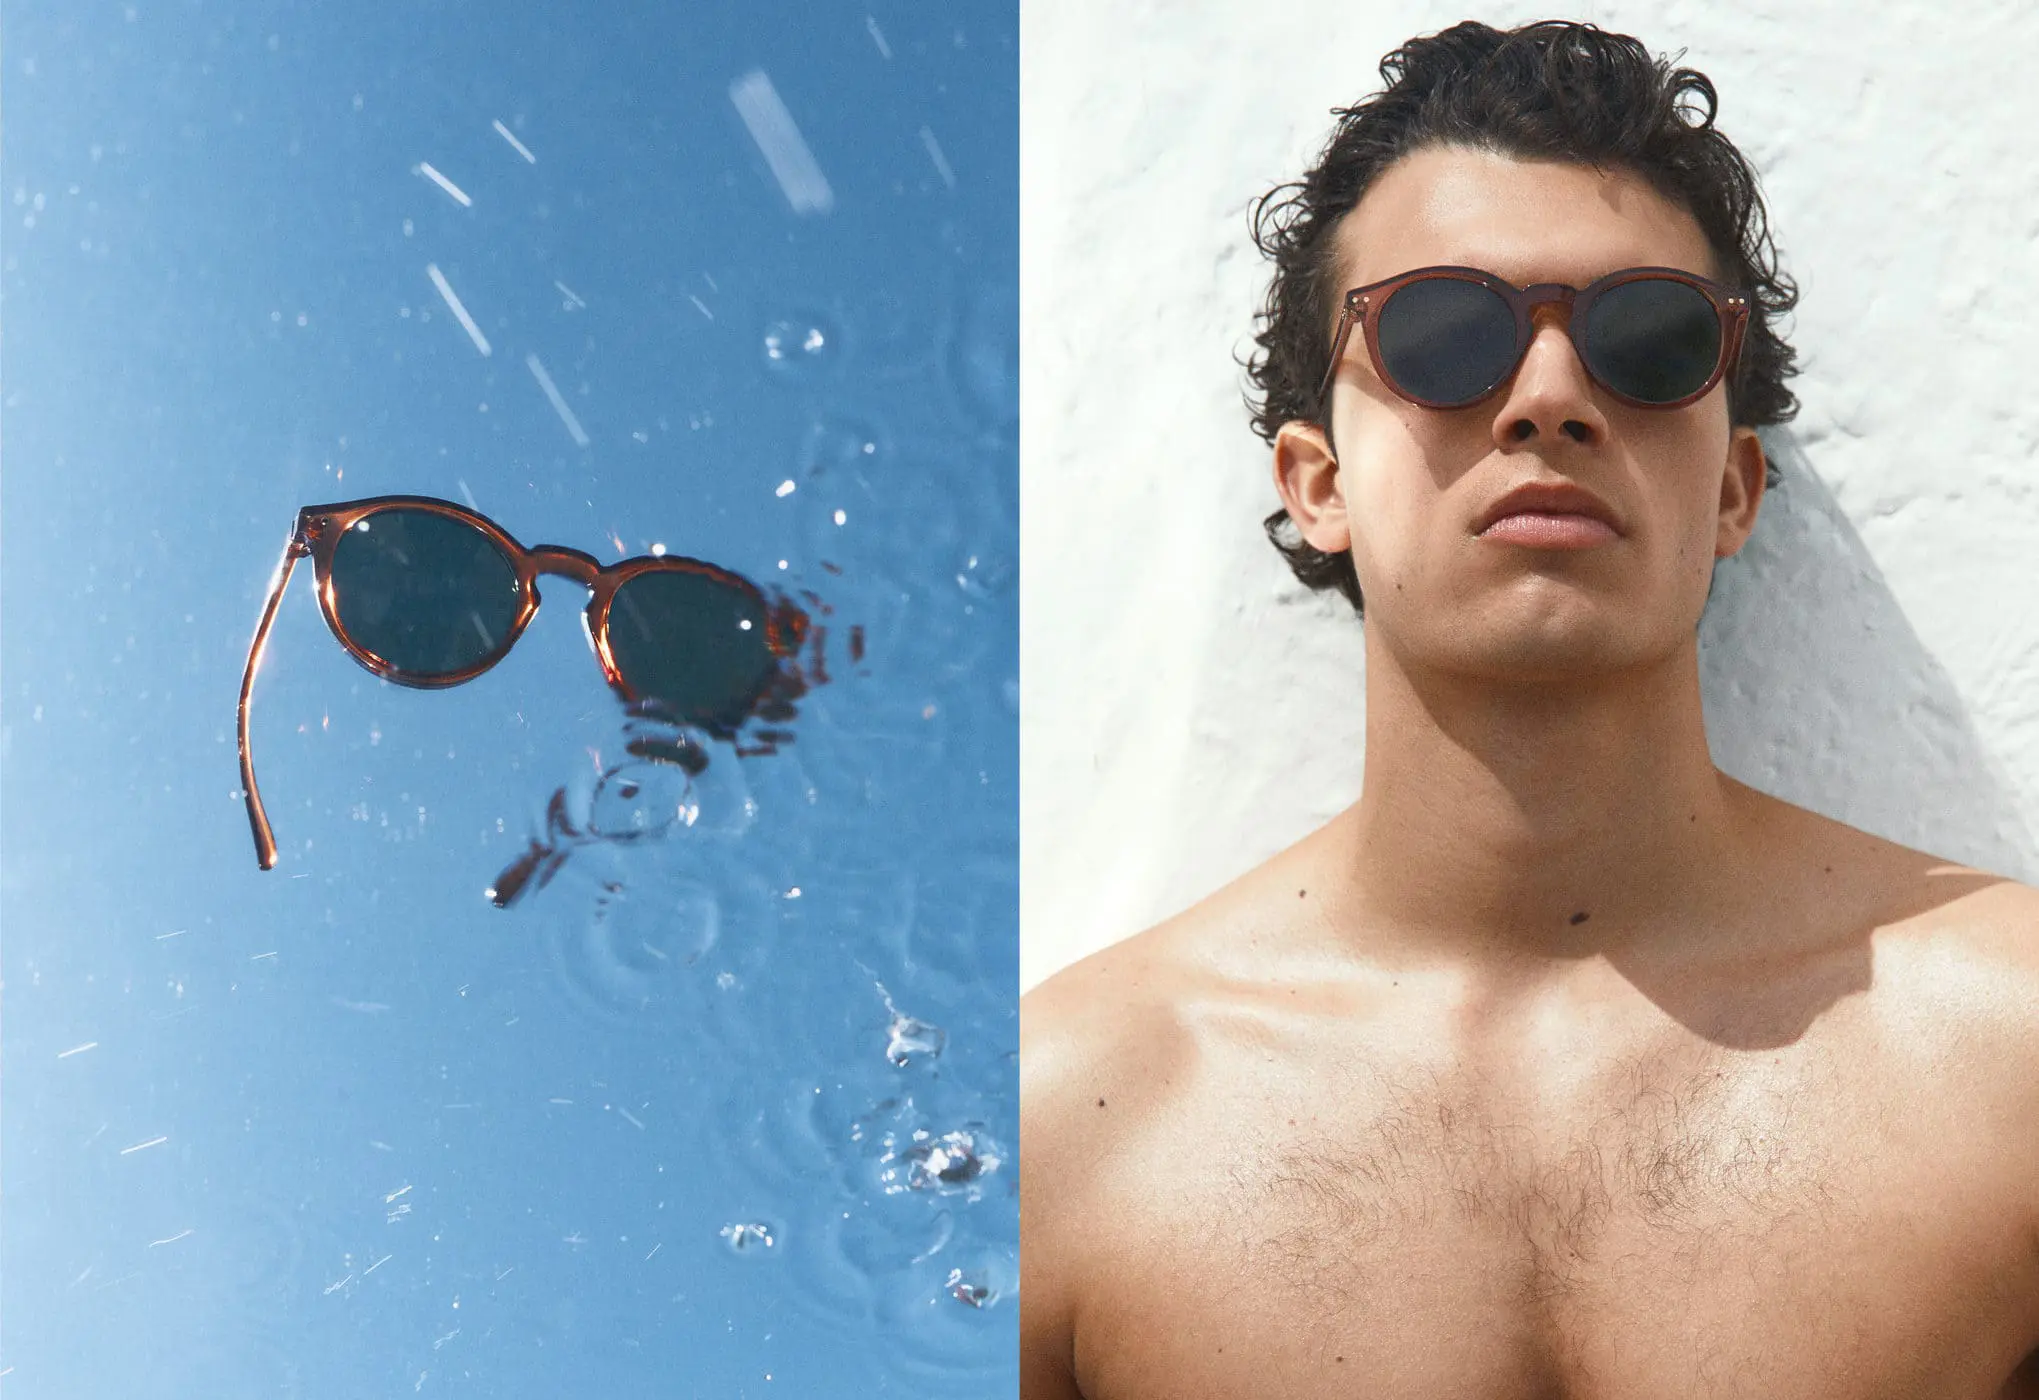 Mango Rounded sunglasses. two pictures of a man in the water and one of the man wearing sunglasses. 